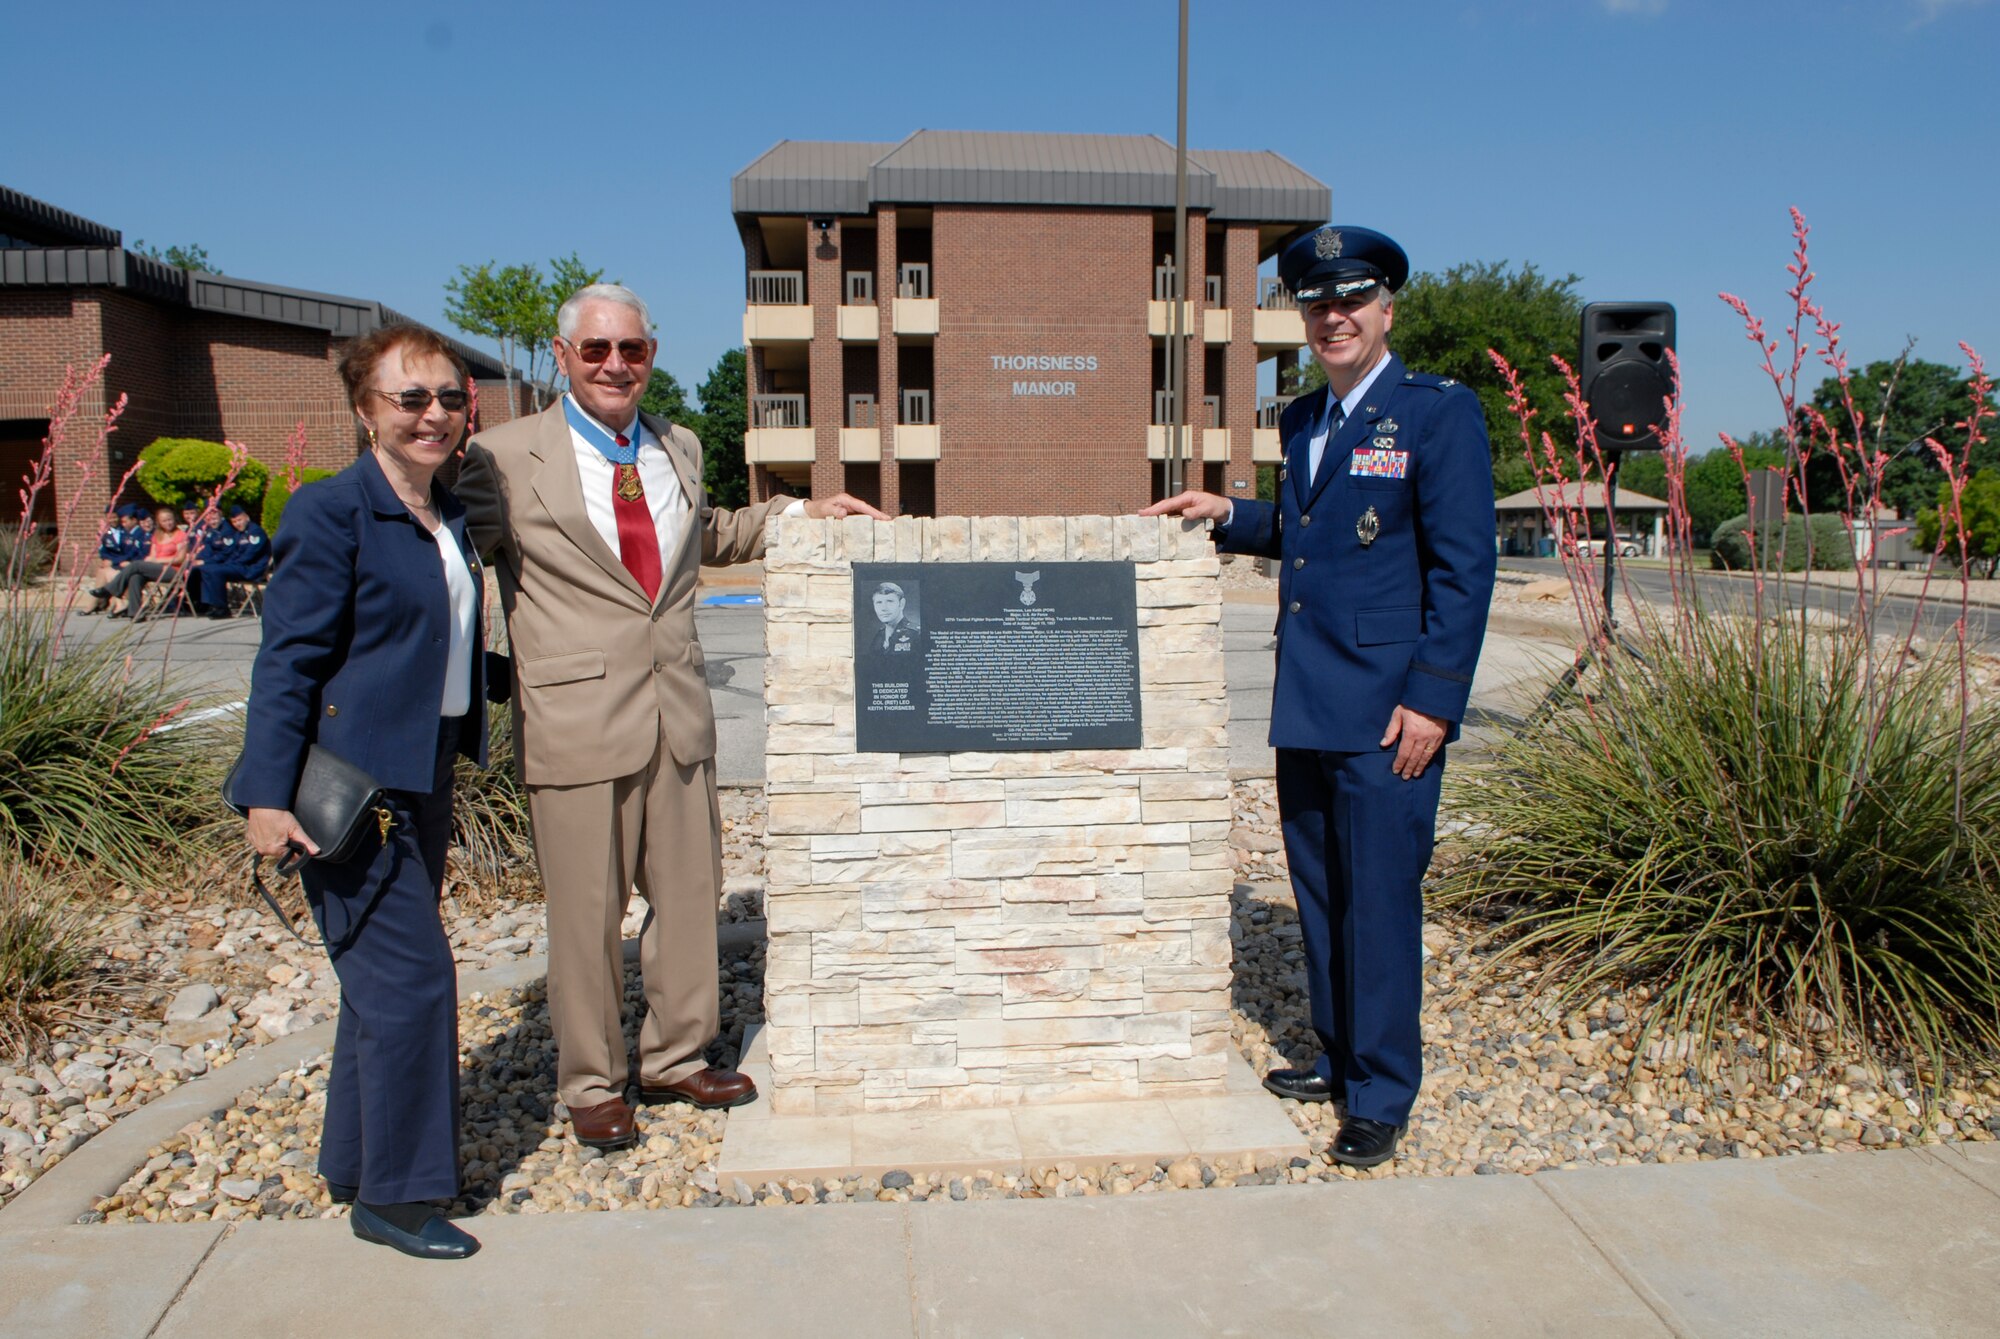 GOODFELLOW AIR FORCE BASE, Texas – Retired Col. Leo K. Thorsness accompanied by his wife Gaylee, and Colonel Thomas Geary, 17th Training Wing commander, unveil the monolith in front of “Thorsness Manor,” May 7, 2010. Two Visiting Officer Quarters were named in honor of retired Colonels Thorsness and George E. “Bud” Day, both of whom received the Medal of Honor for combat actions while serving in Vietnam. (U.S. Air Force photo/Lou Czarnecki)